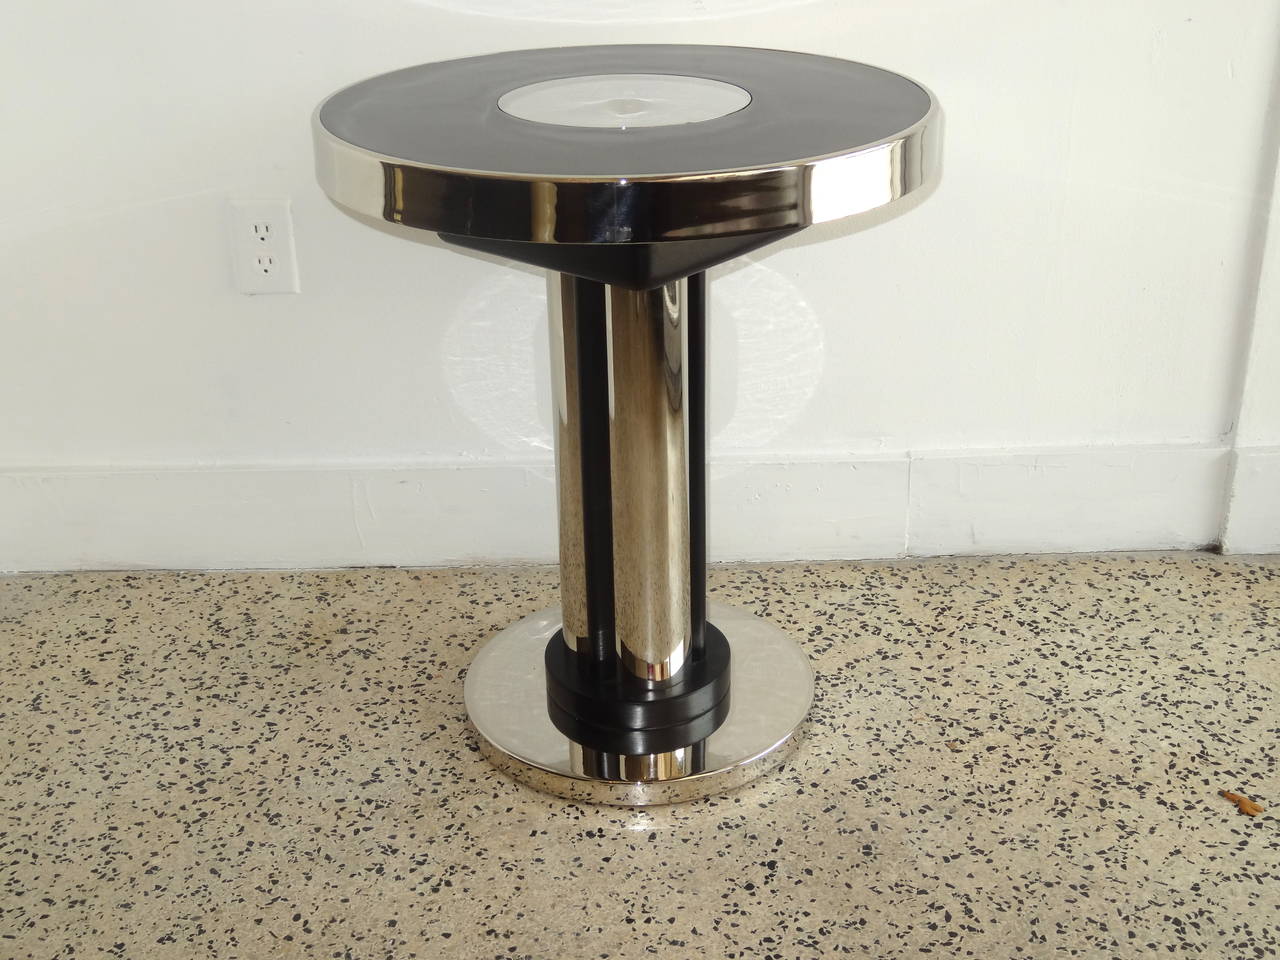 Art Deco side table with nickel plated metal and espresso stained wood parts.
Has just restored.